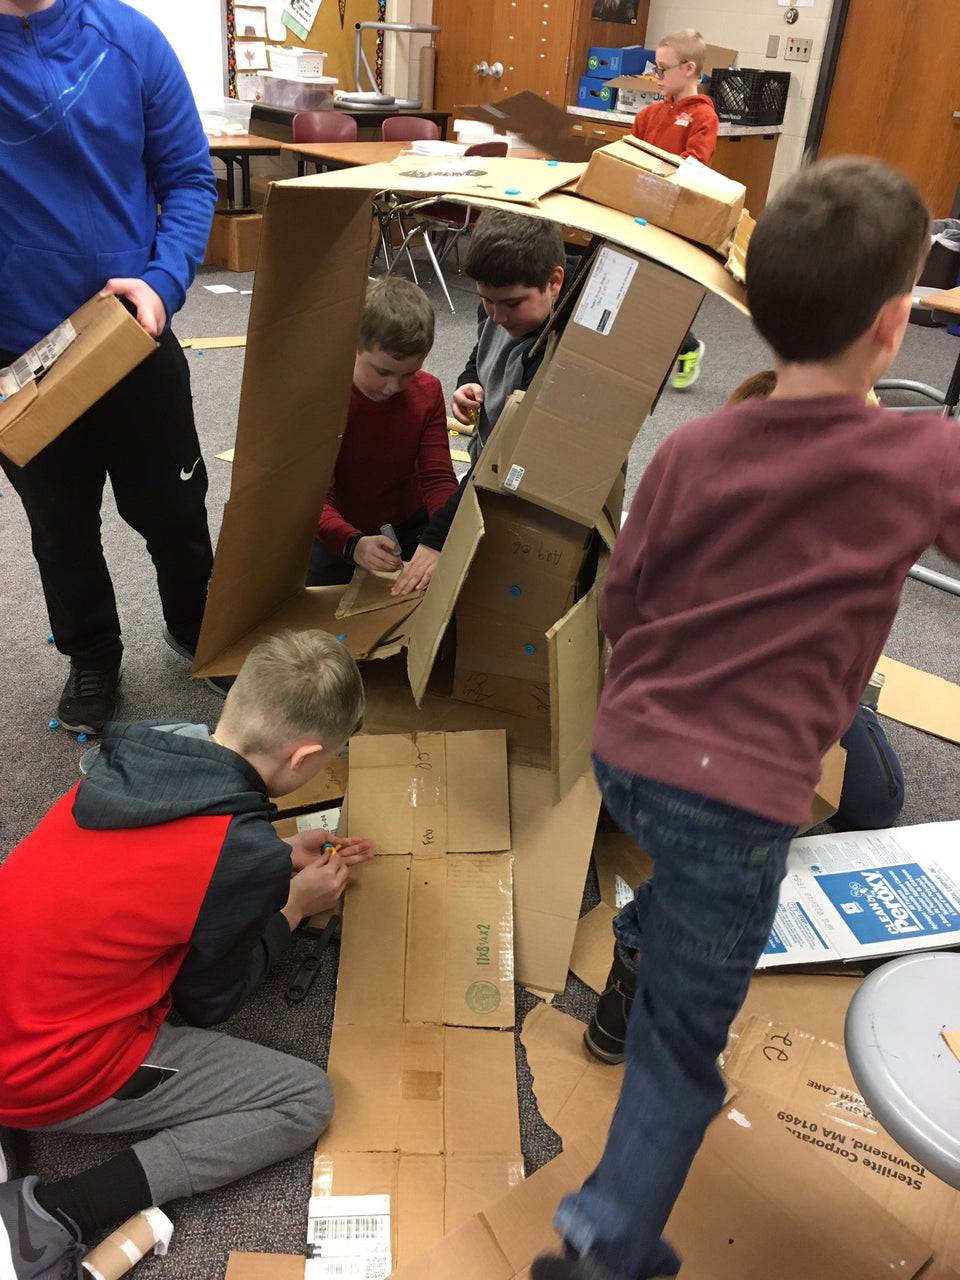 Building the tallest cardboard tower with Makedo tools.